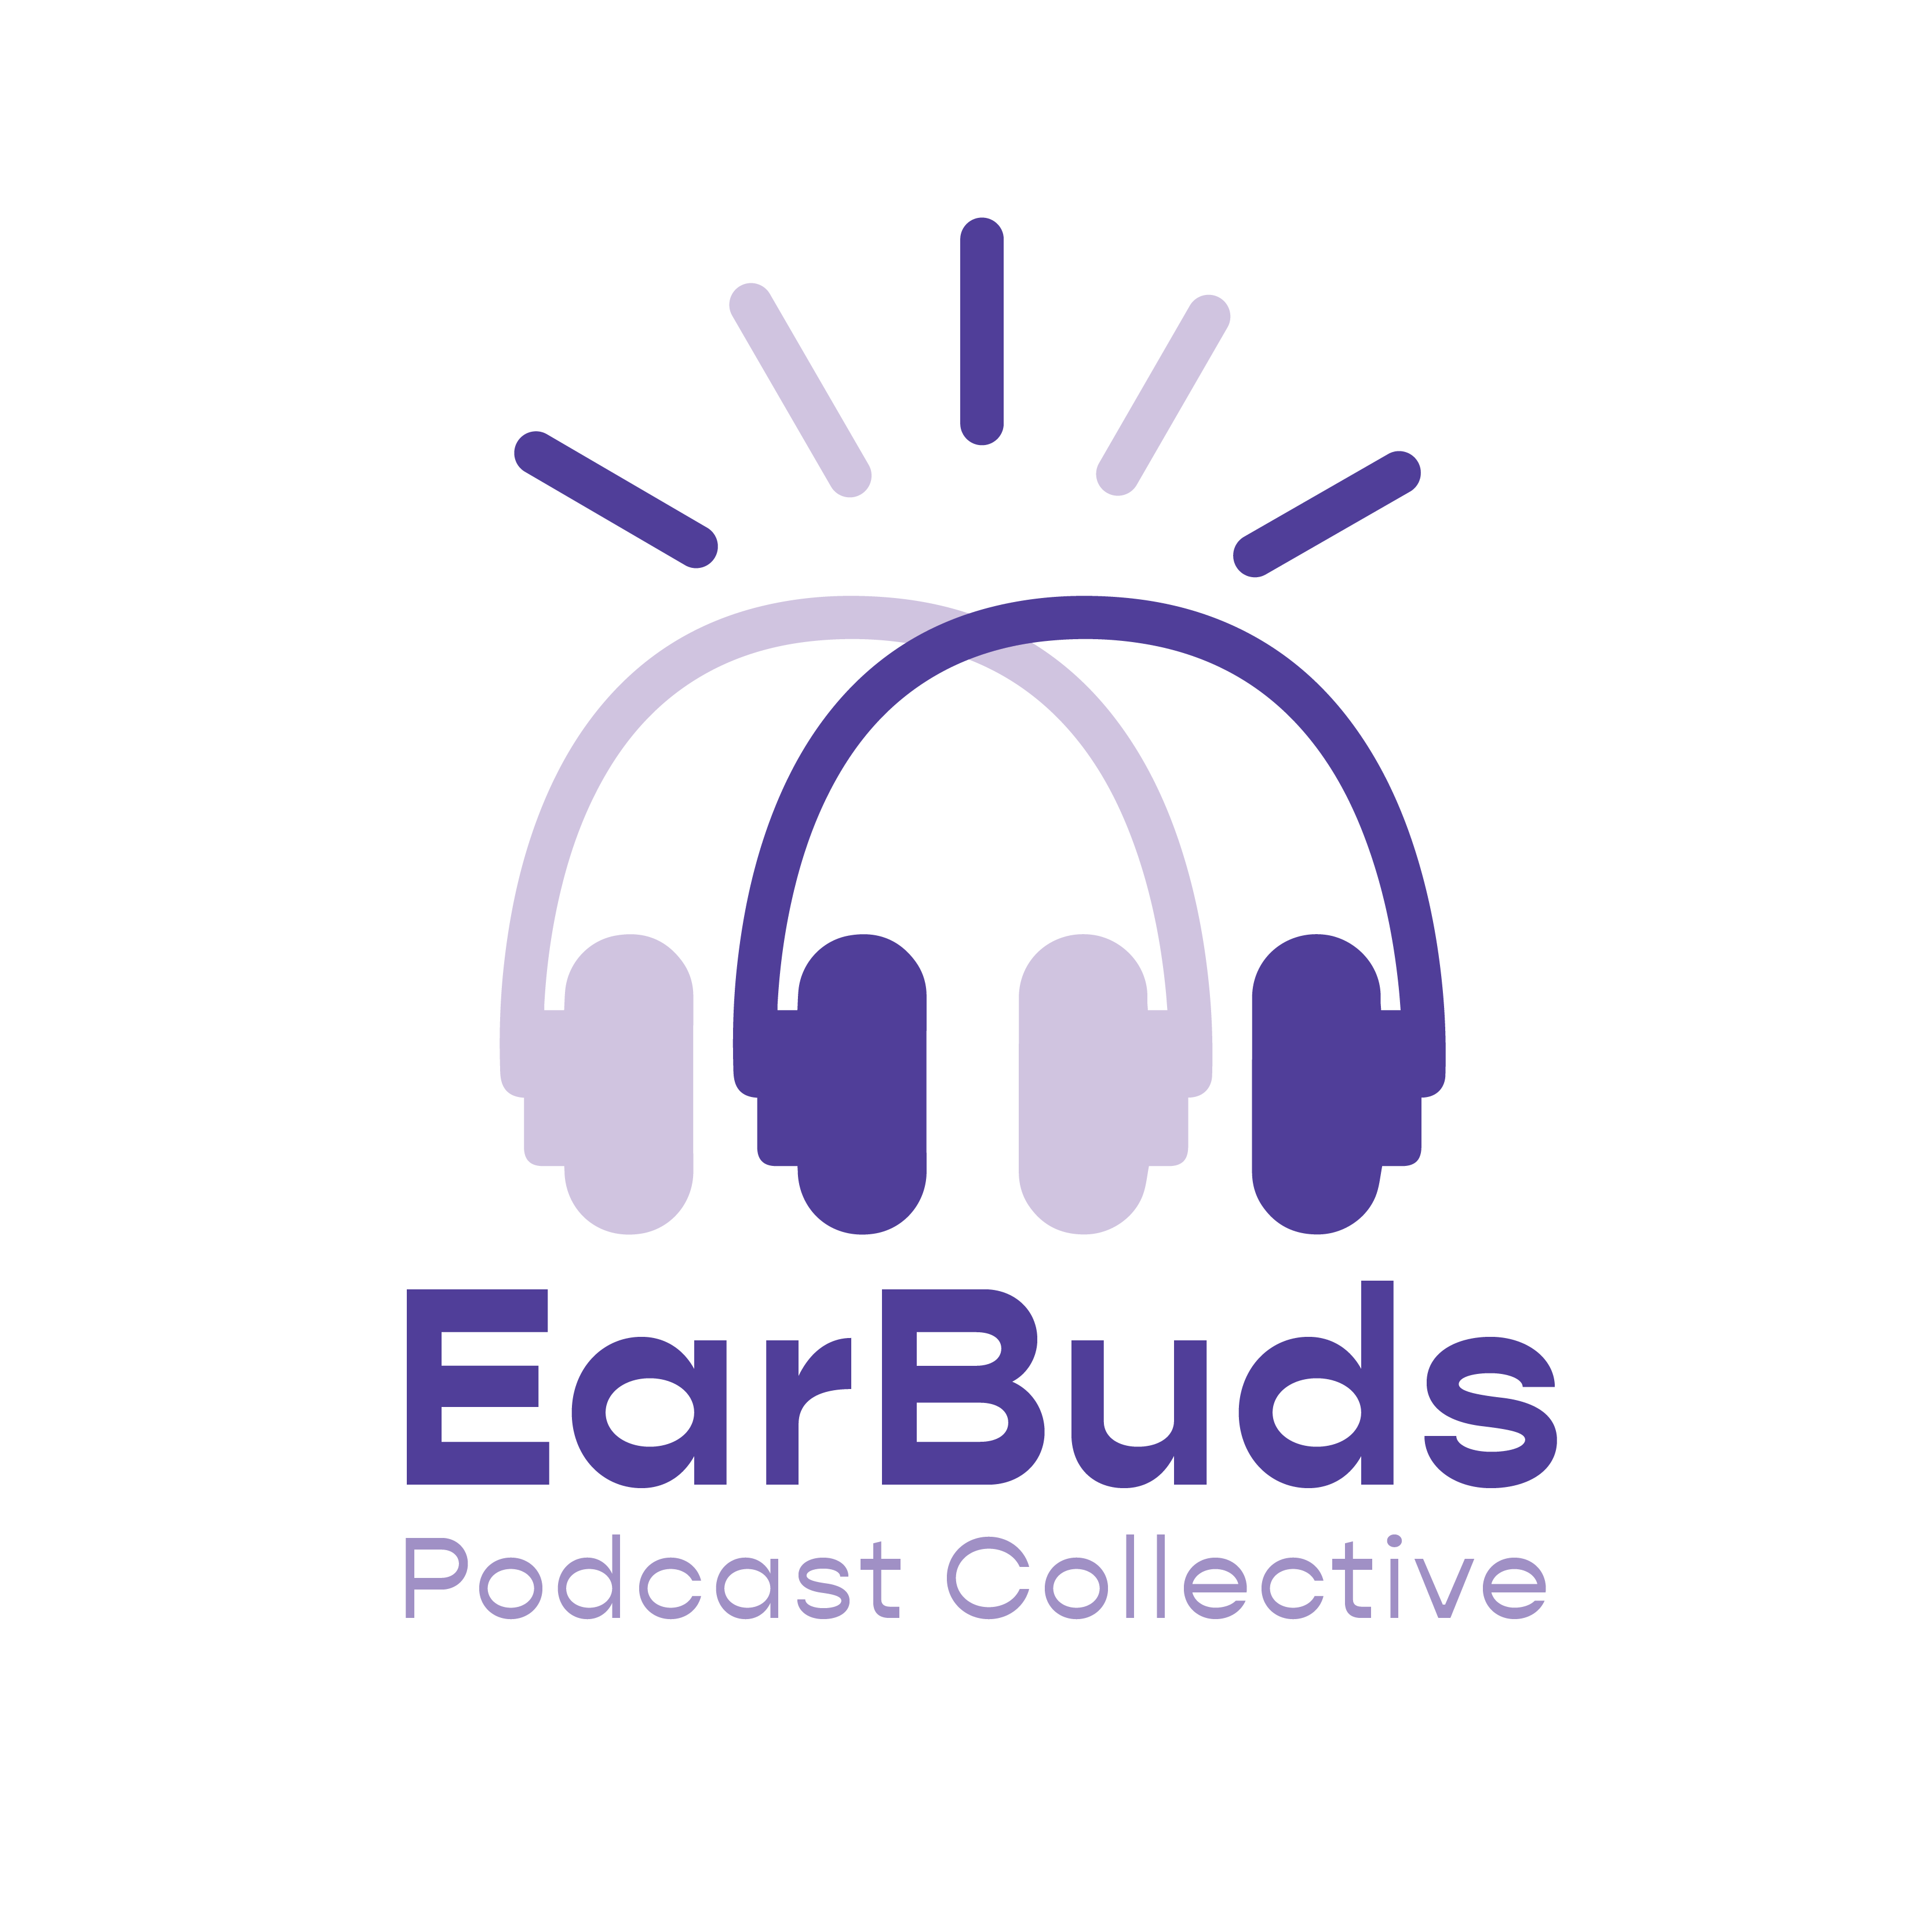 EarBuds Podcast Collective